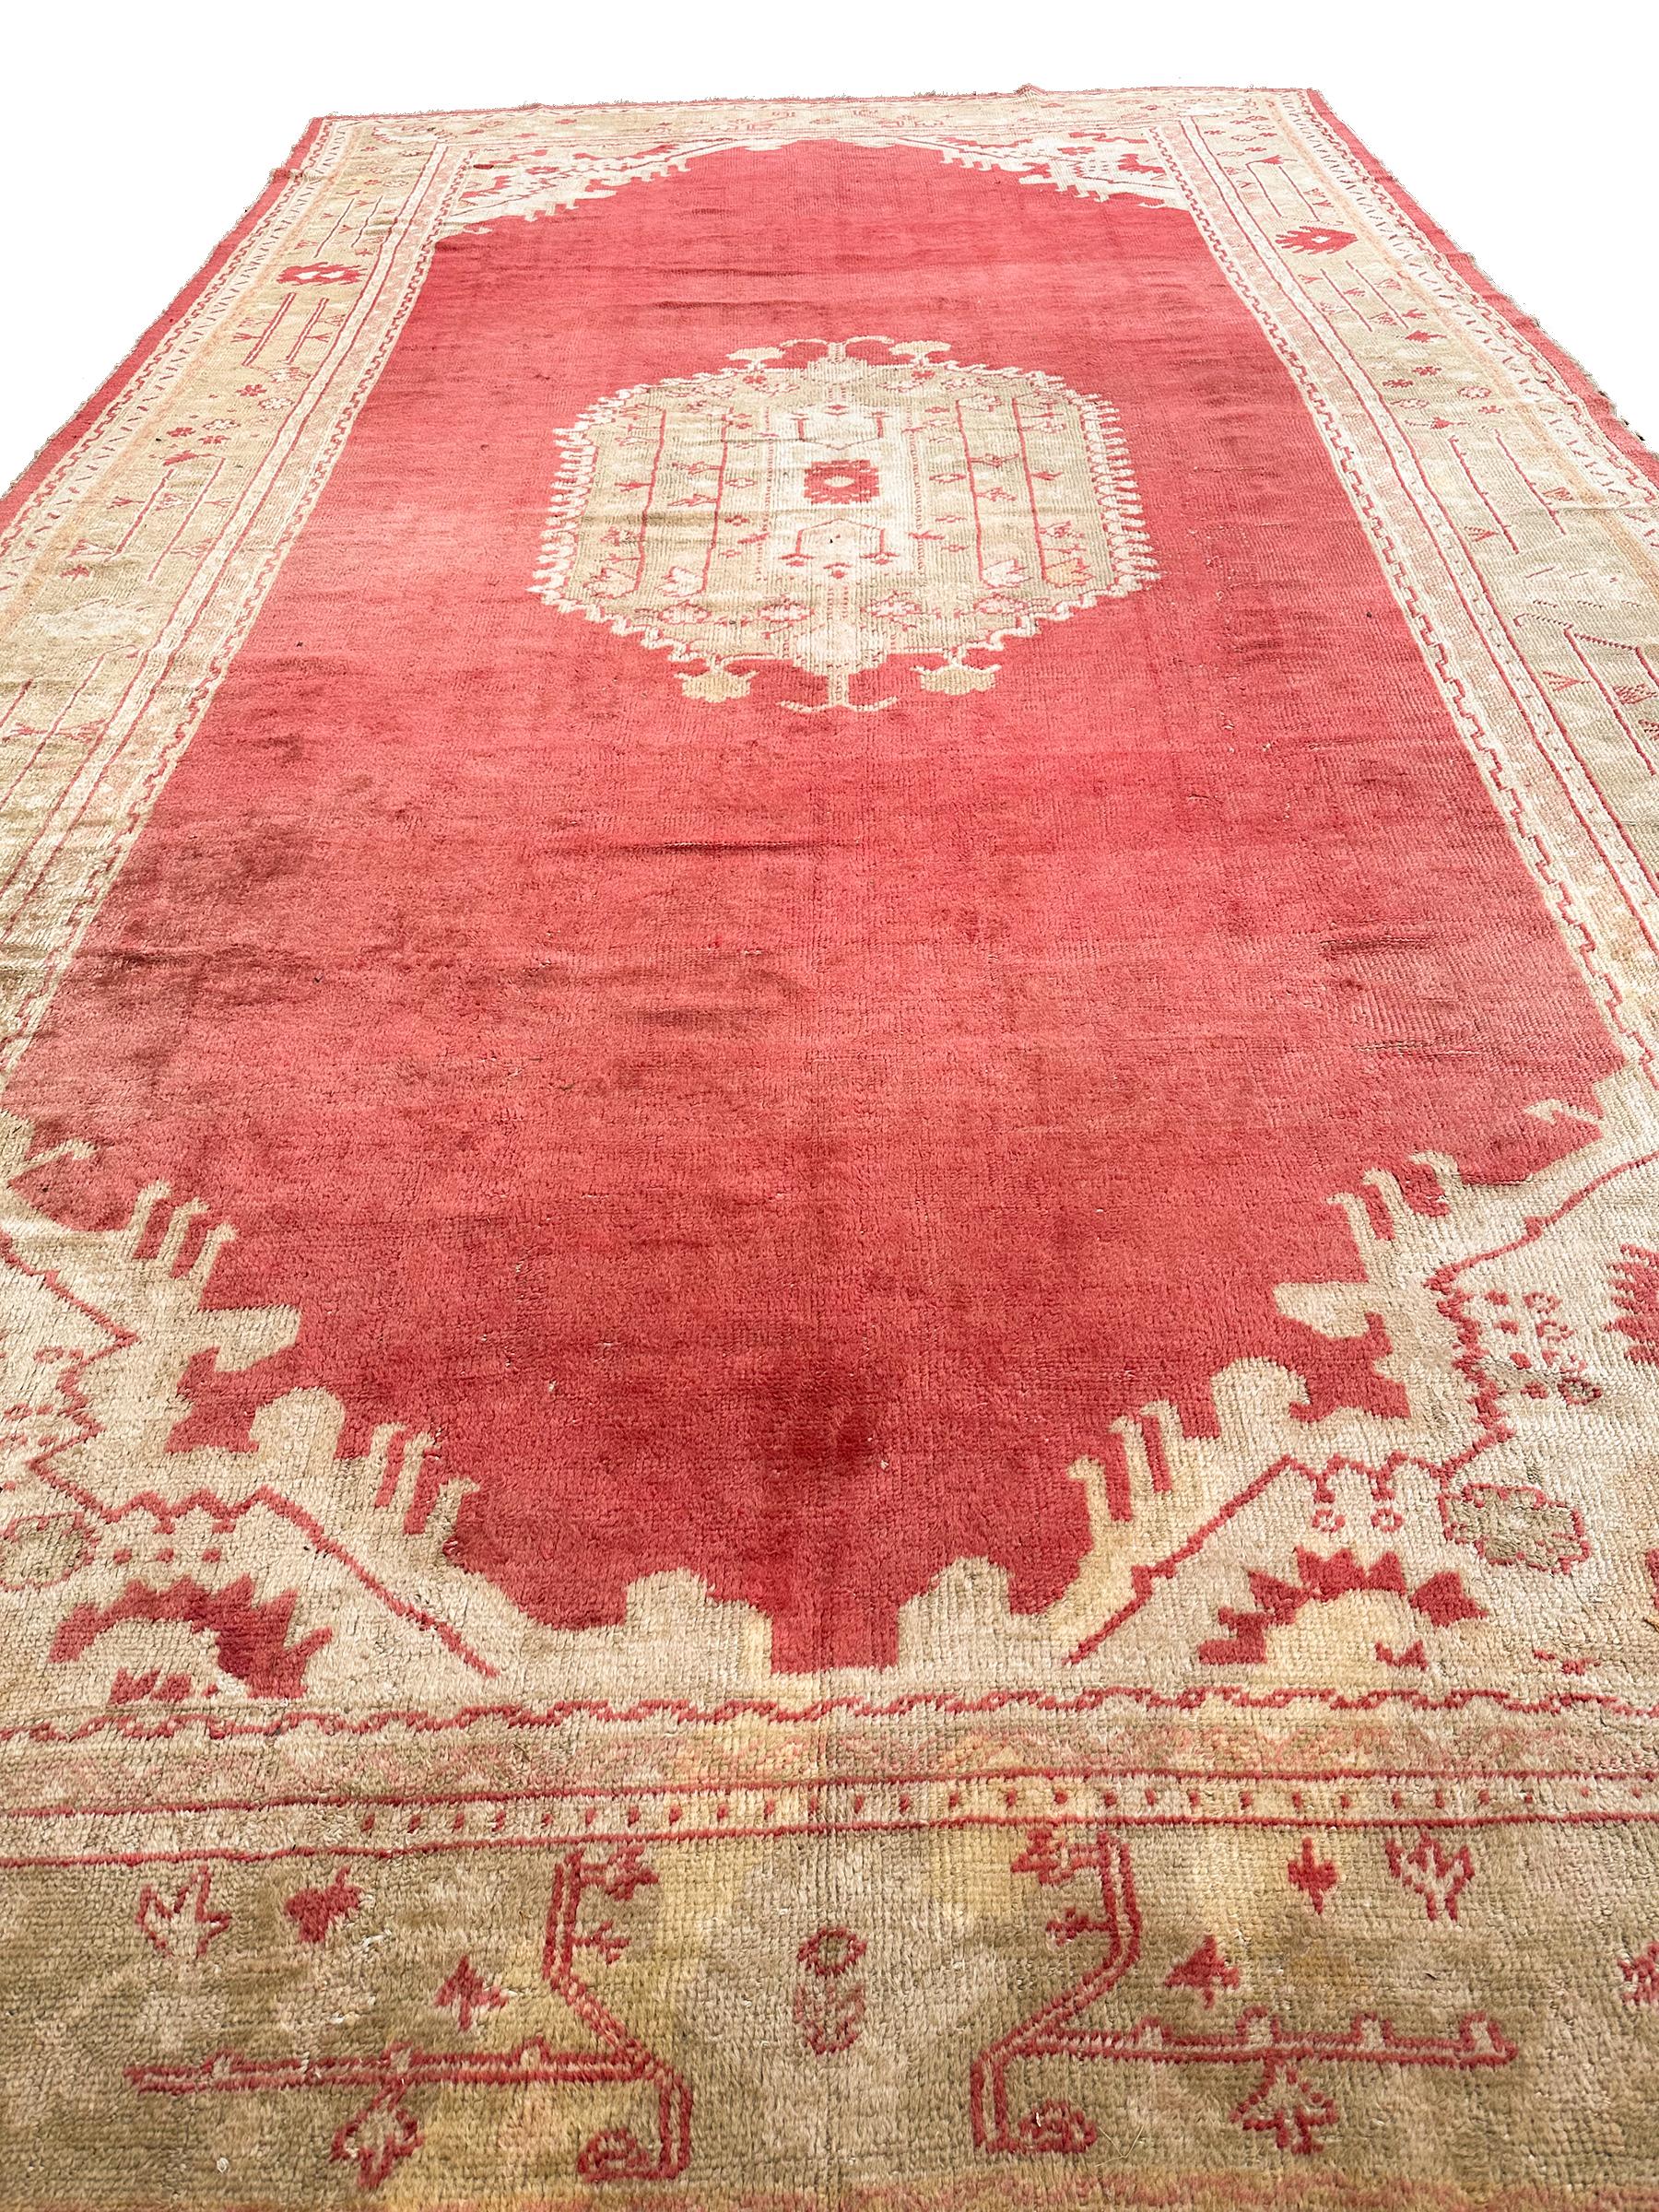 Authentic Antique Oushak Oversized Wool Foundation 1900 10x18 Handmade 305x549cm For Sale 3